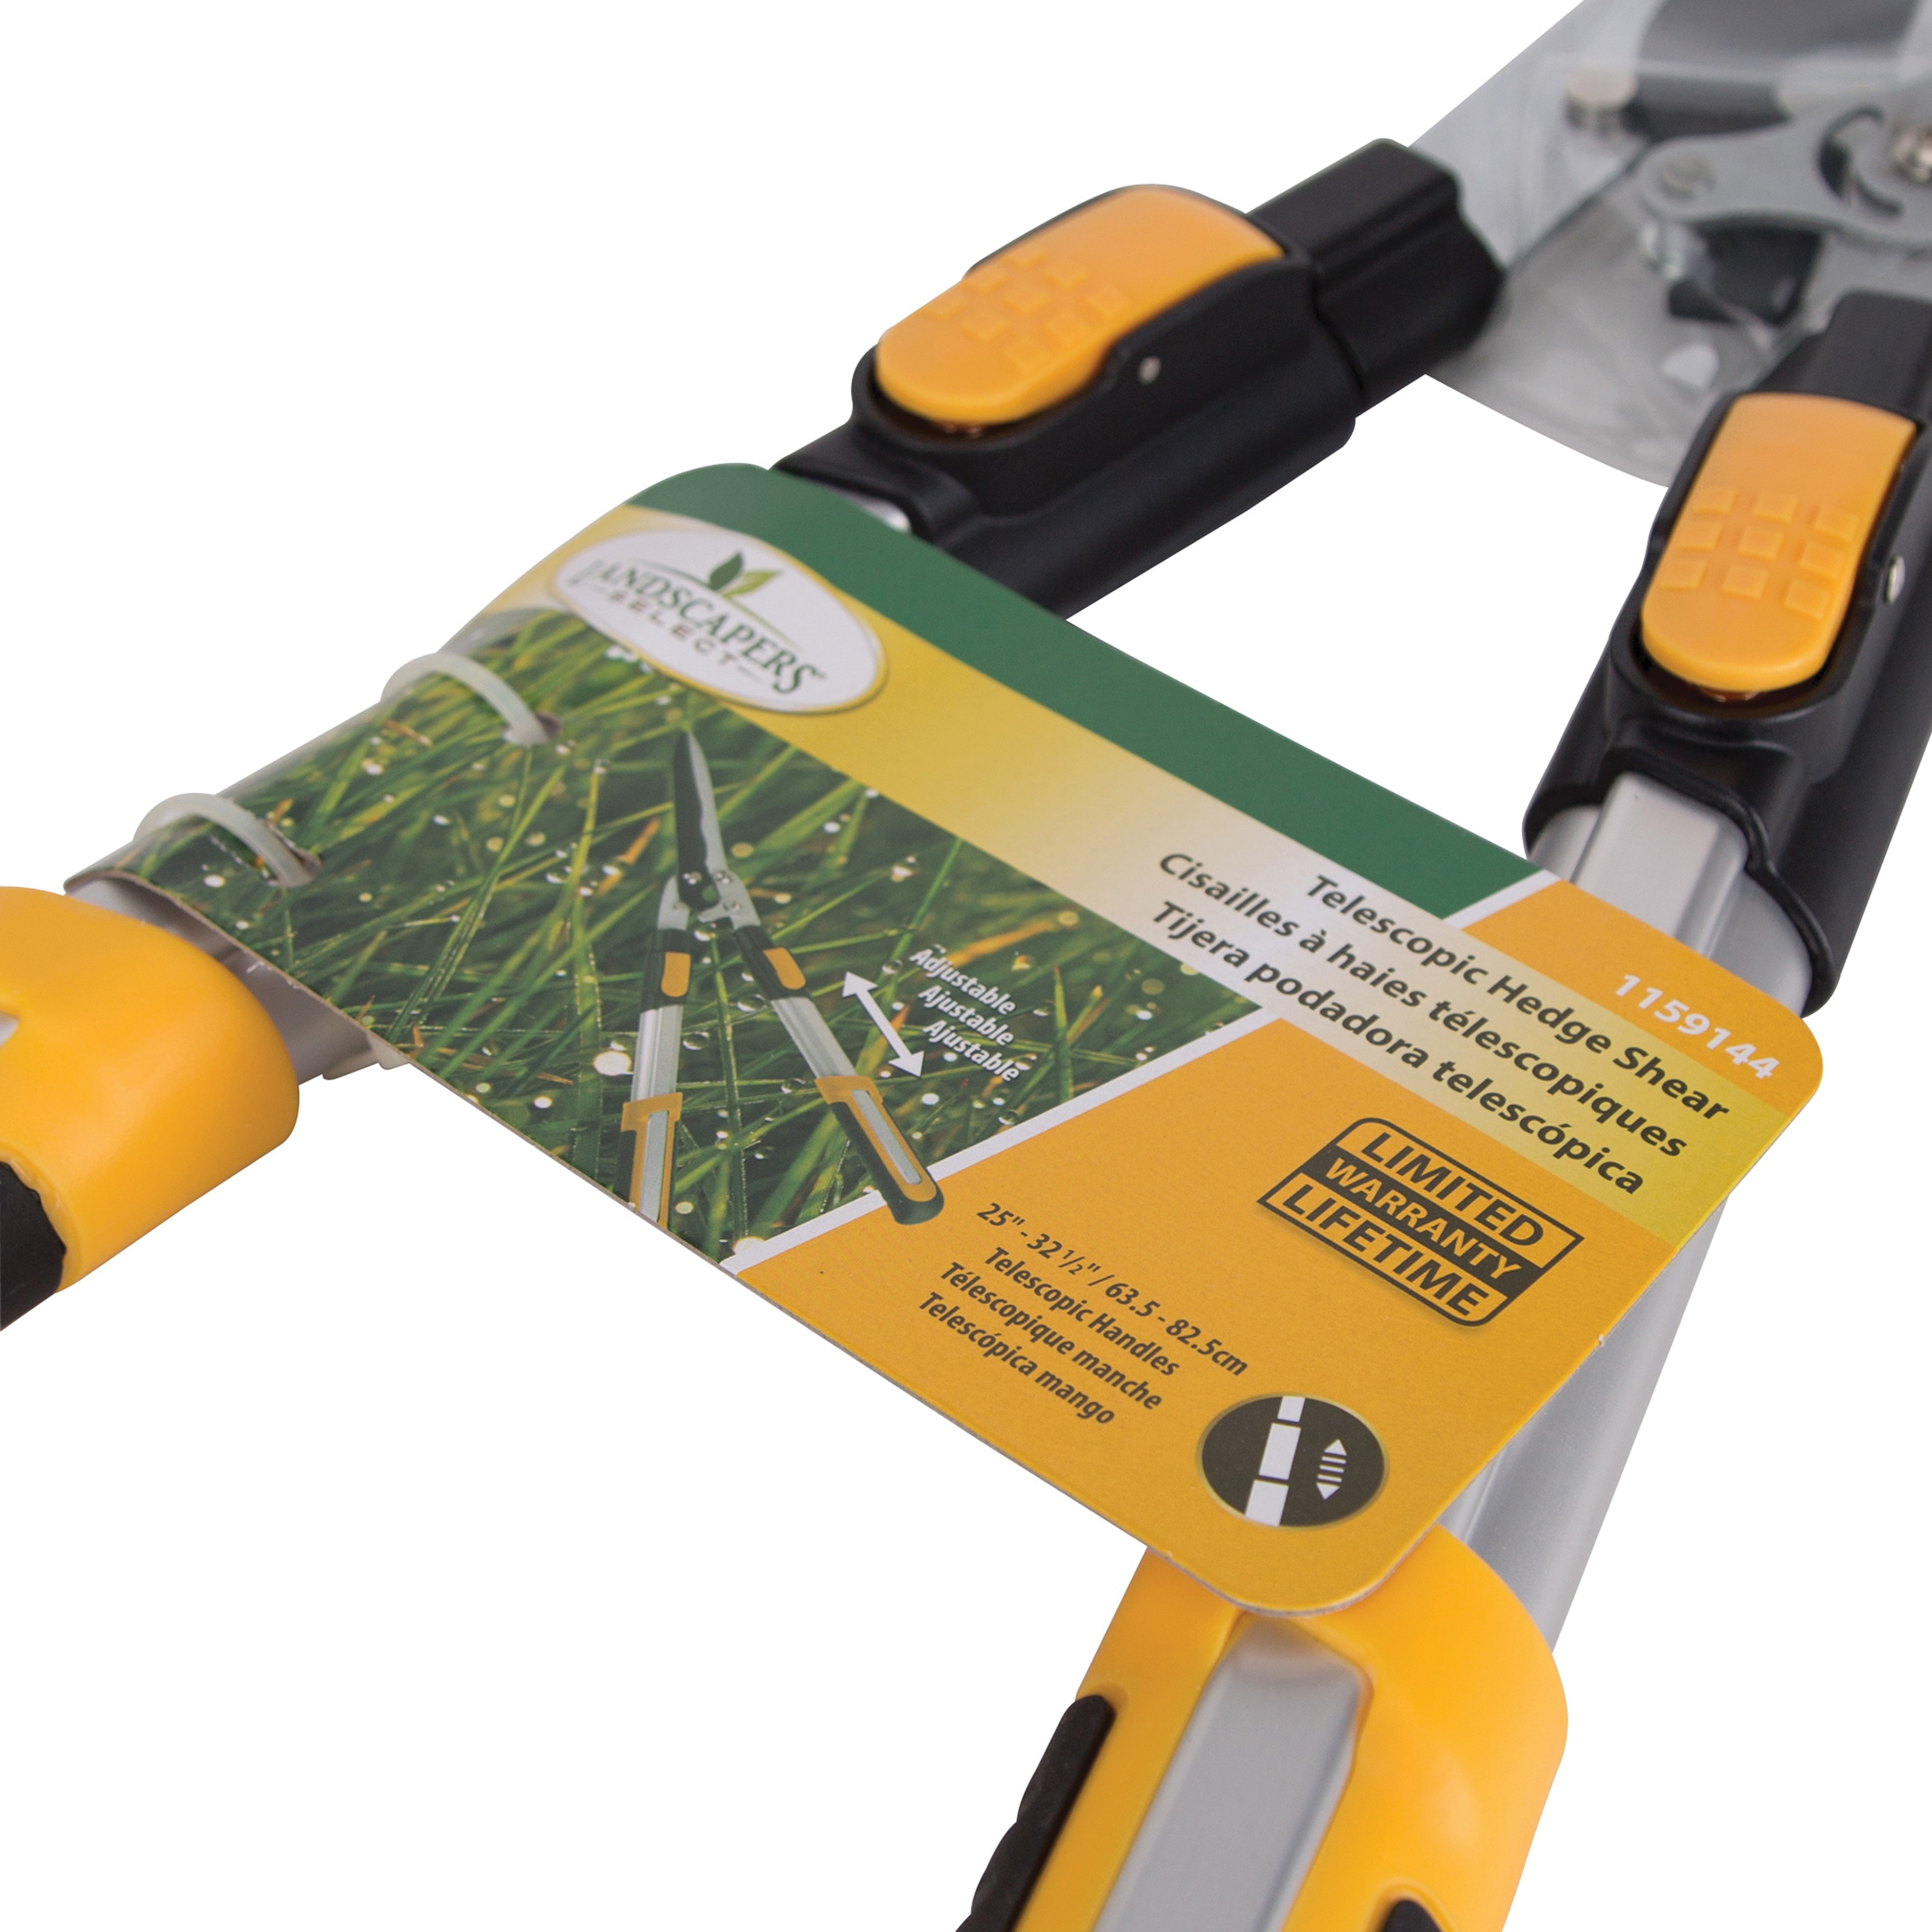 Landscapers Select GH48126 Telescopic Hedge Shear, Straight with Wave Curve Blade, 8-1/4 in L Blade, Steel Blade - 2